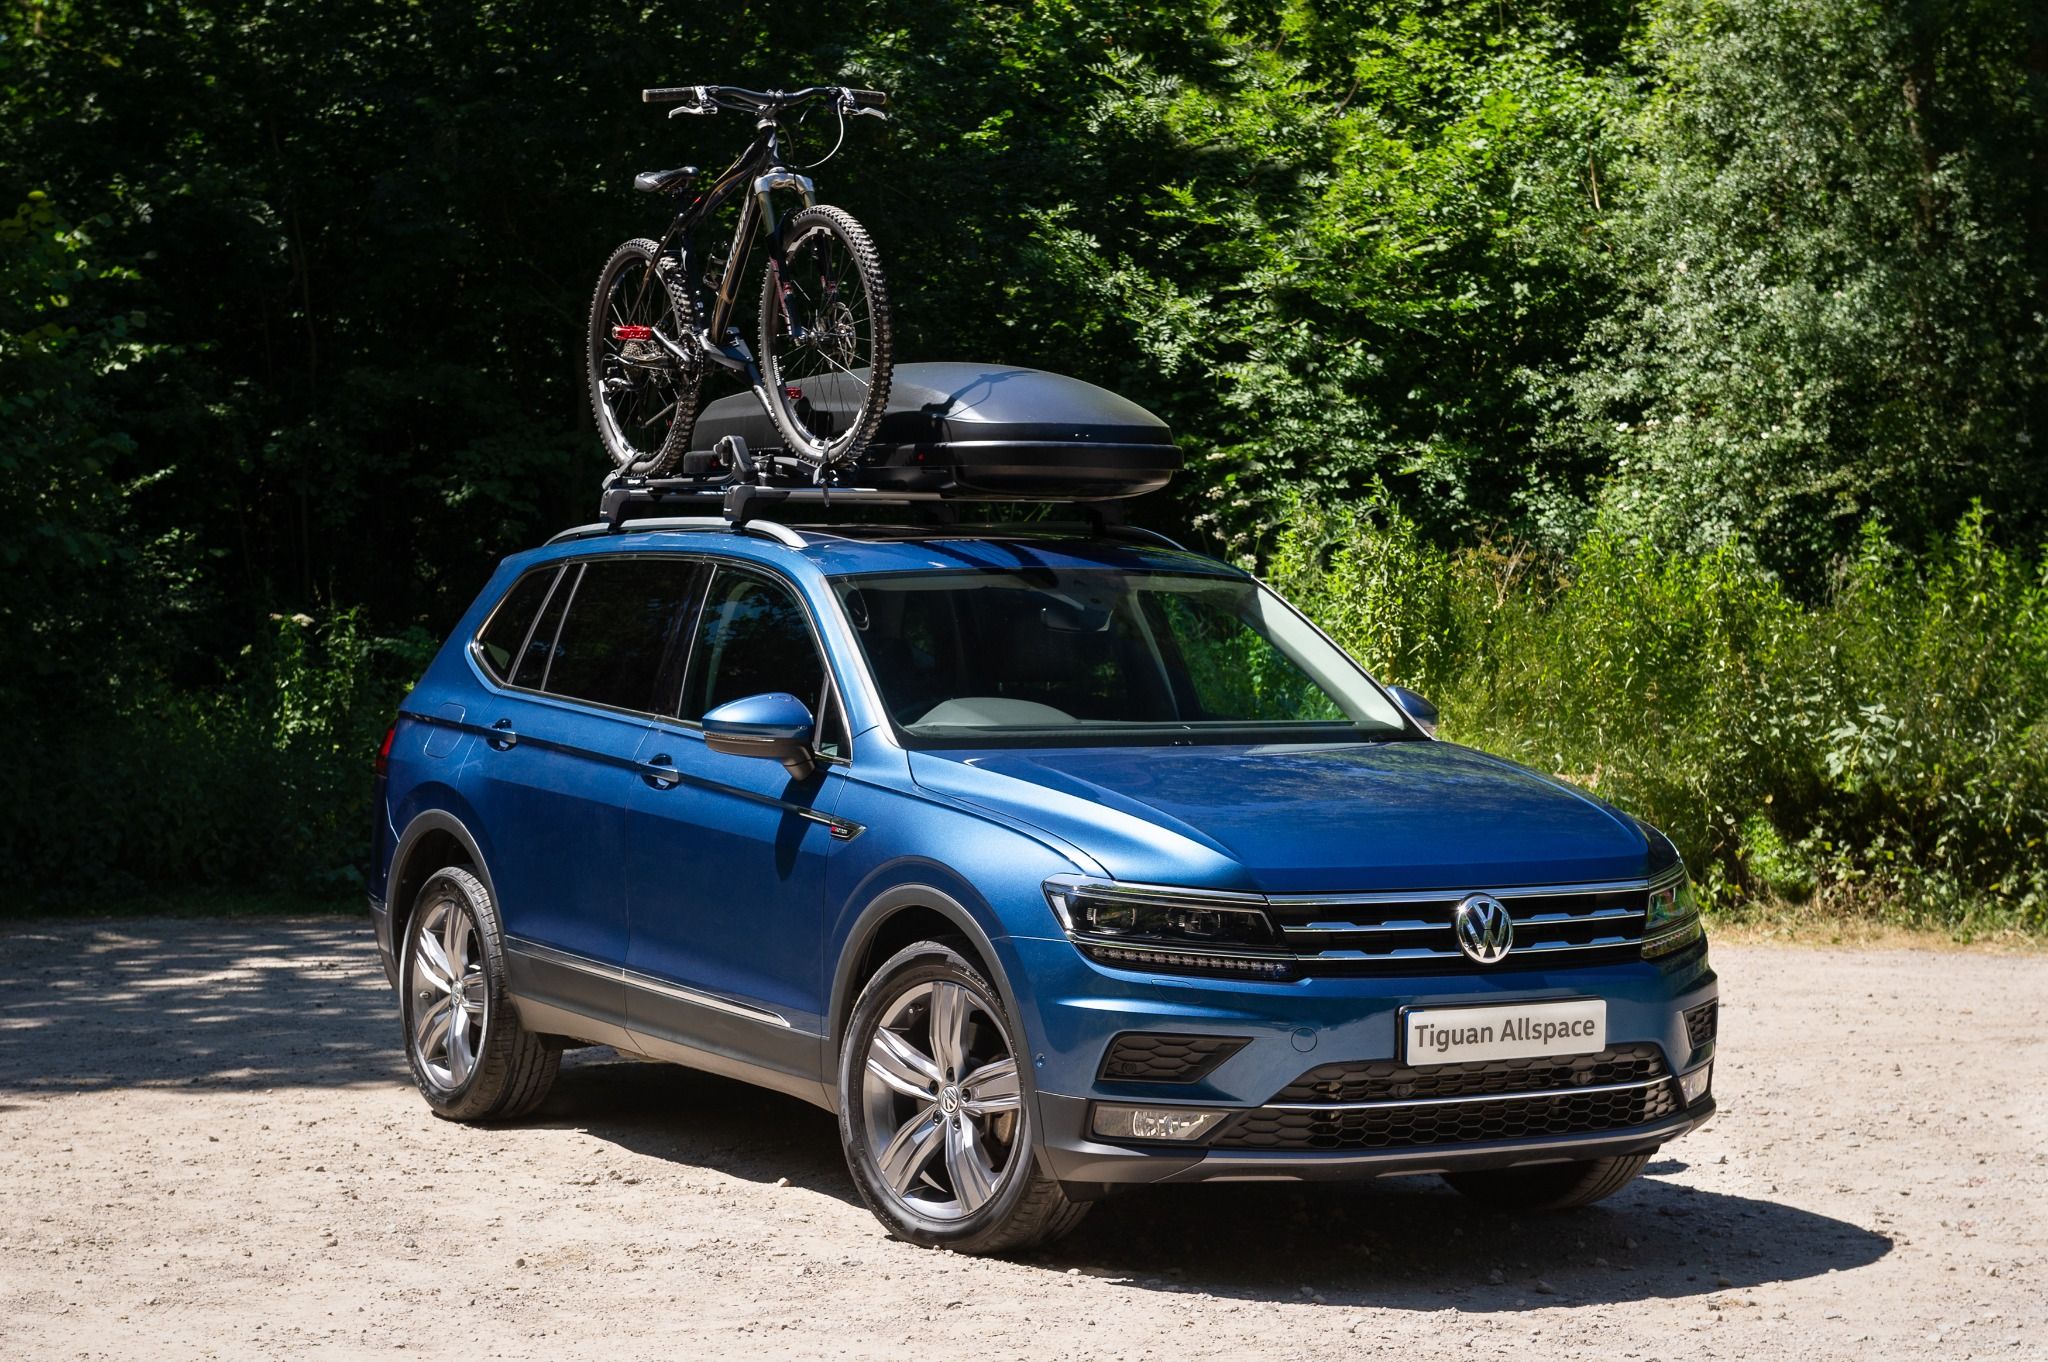 Blue Tiguan Allspace with a roof box and a bike on the roof rails